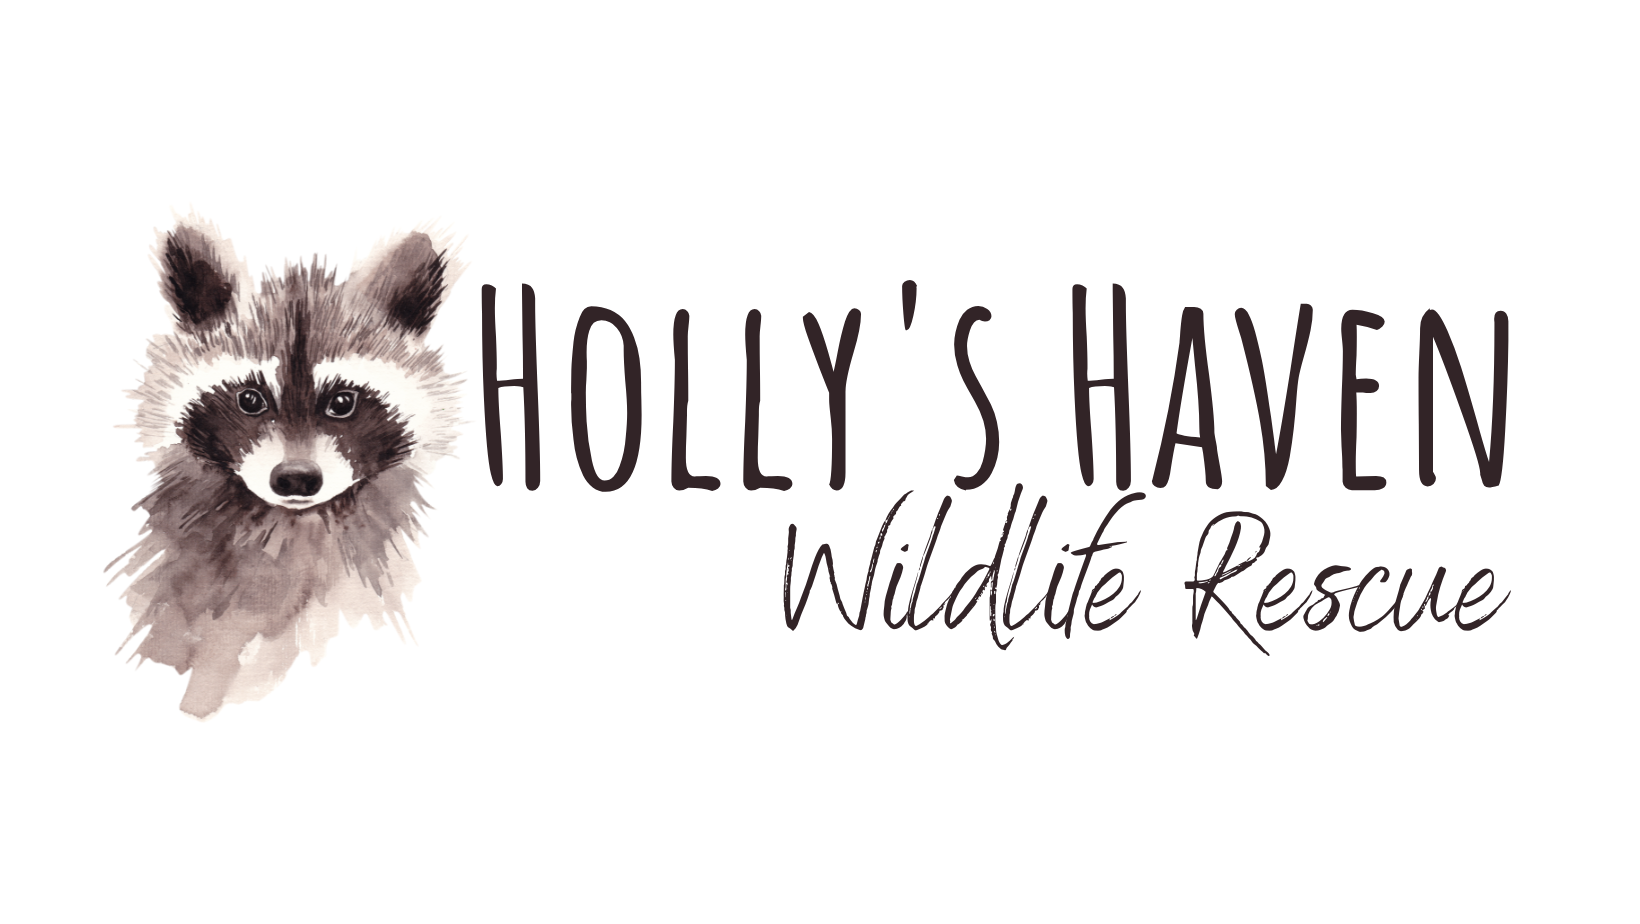 Holly's Haven Wildlife Rescue